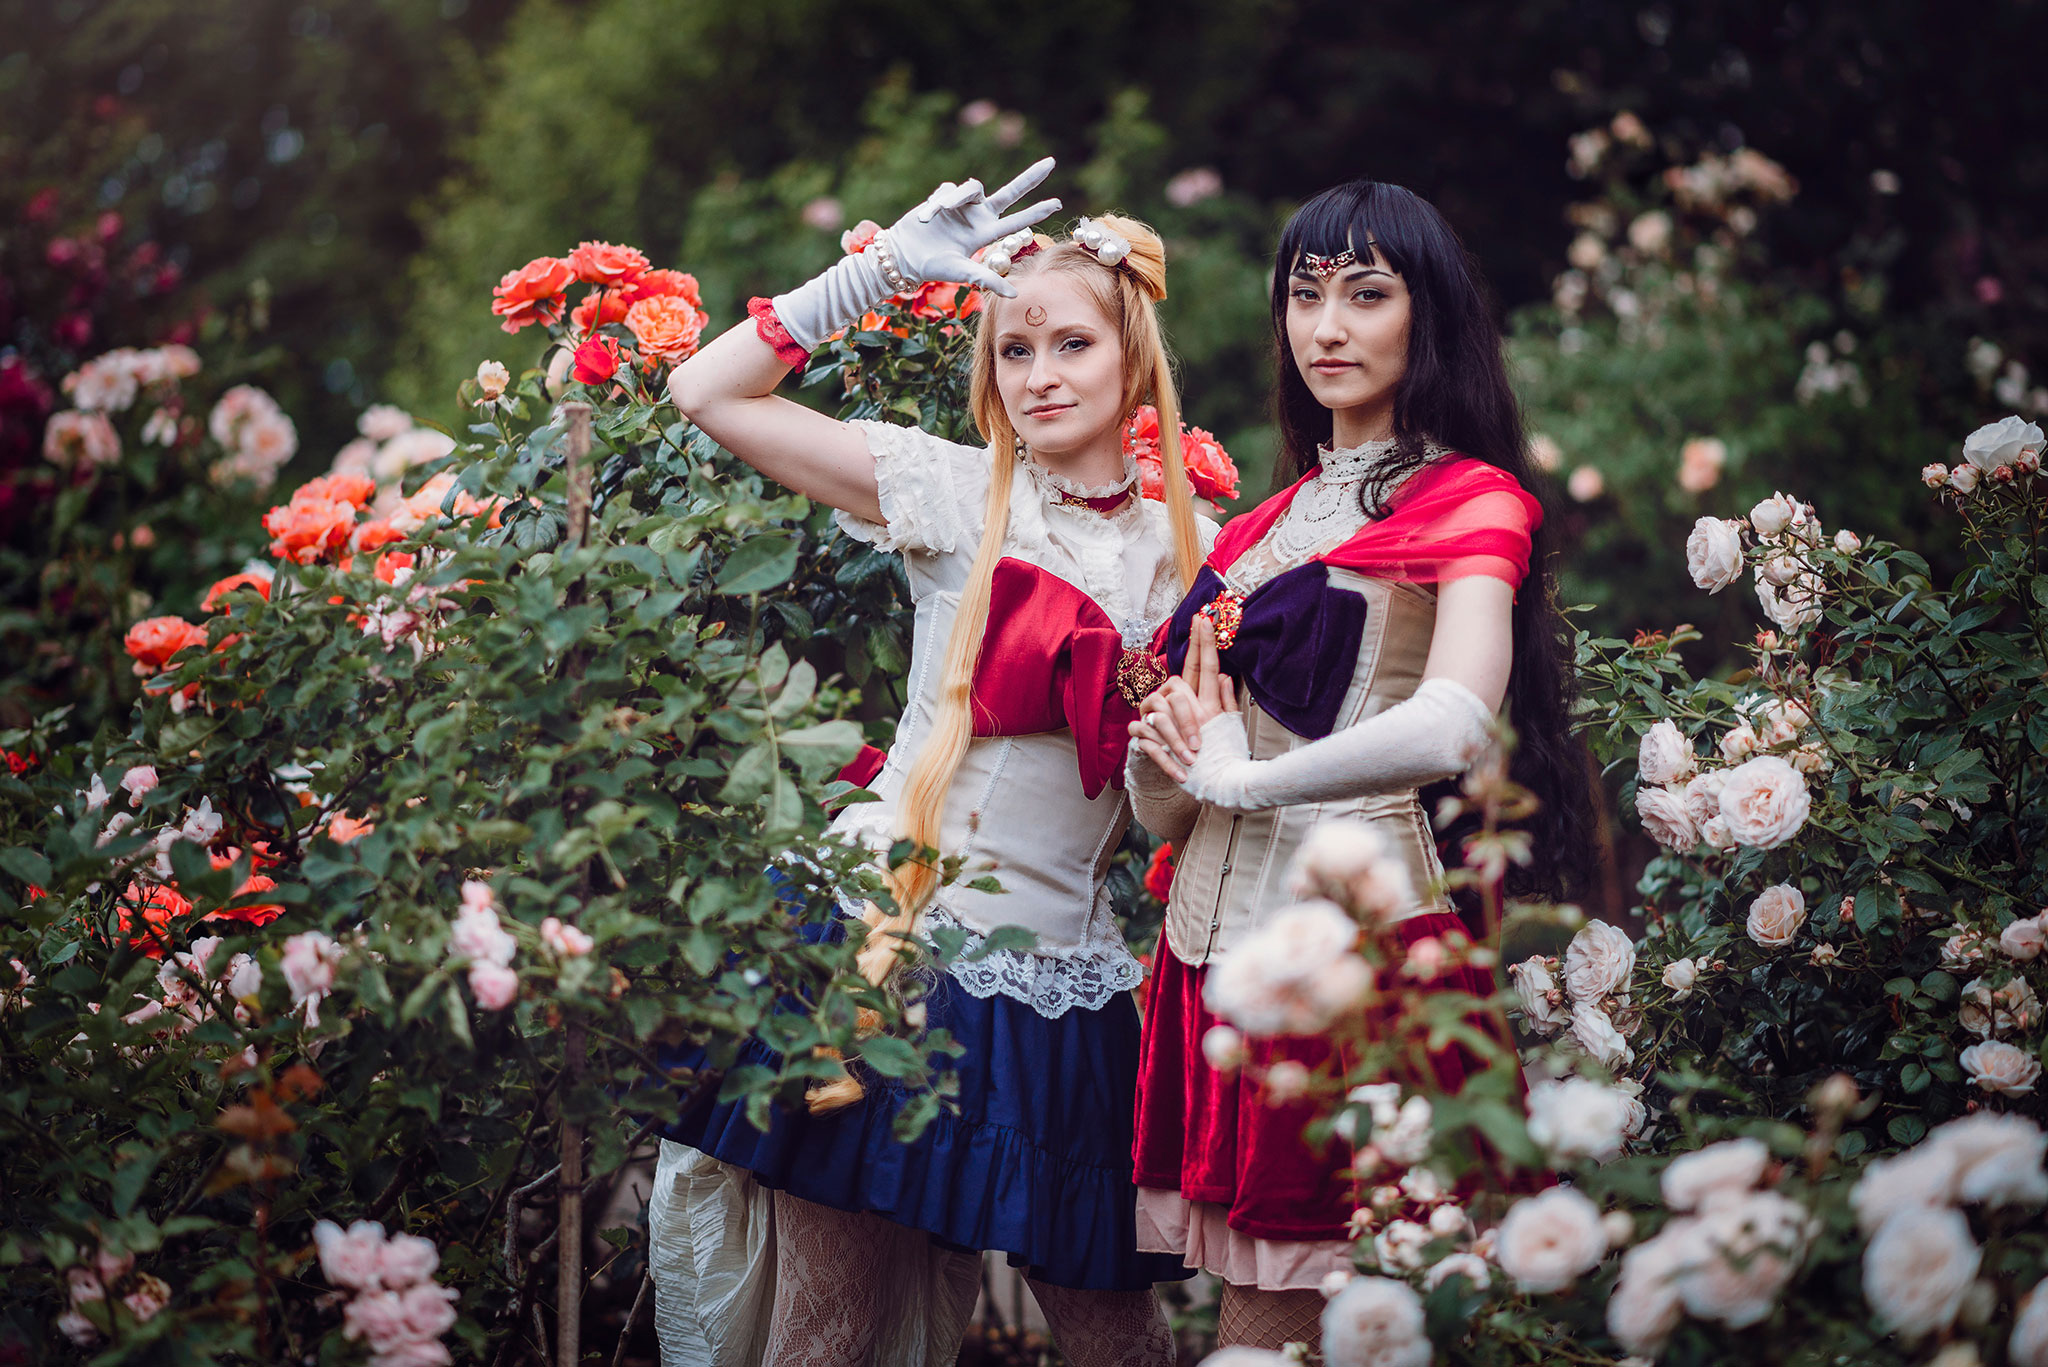 Sailor Moon and Sailor Mars cosplay photoshoot in Victoria, BC gardens.